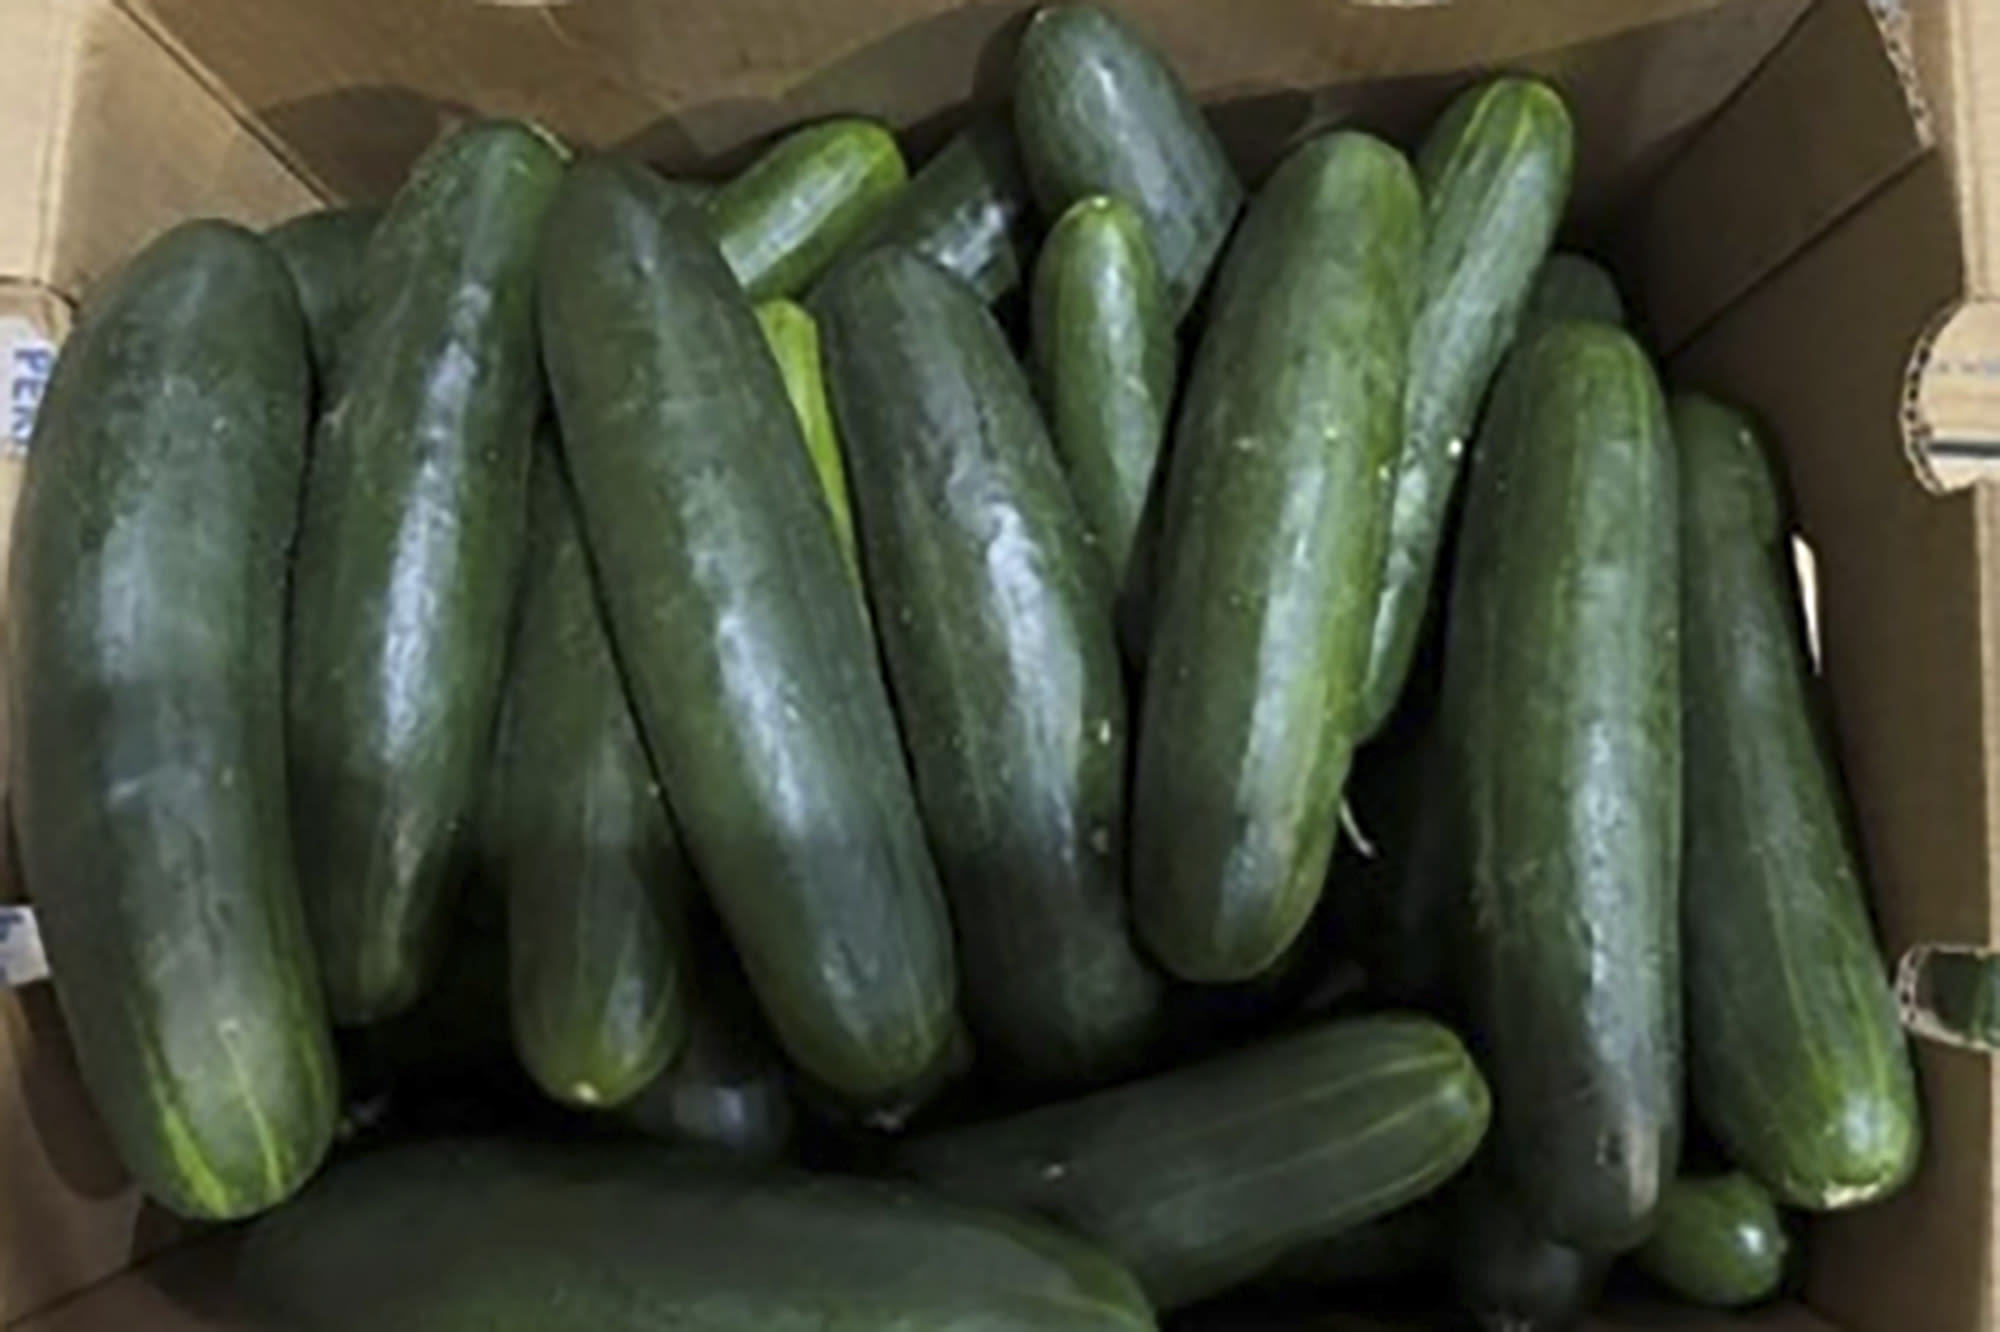 Salmonella outbreak may be linked to recalled cucumbers, CDC says - The Republic News